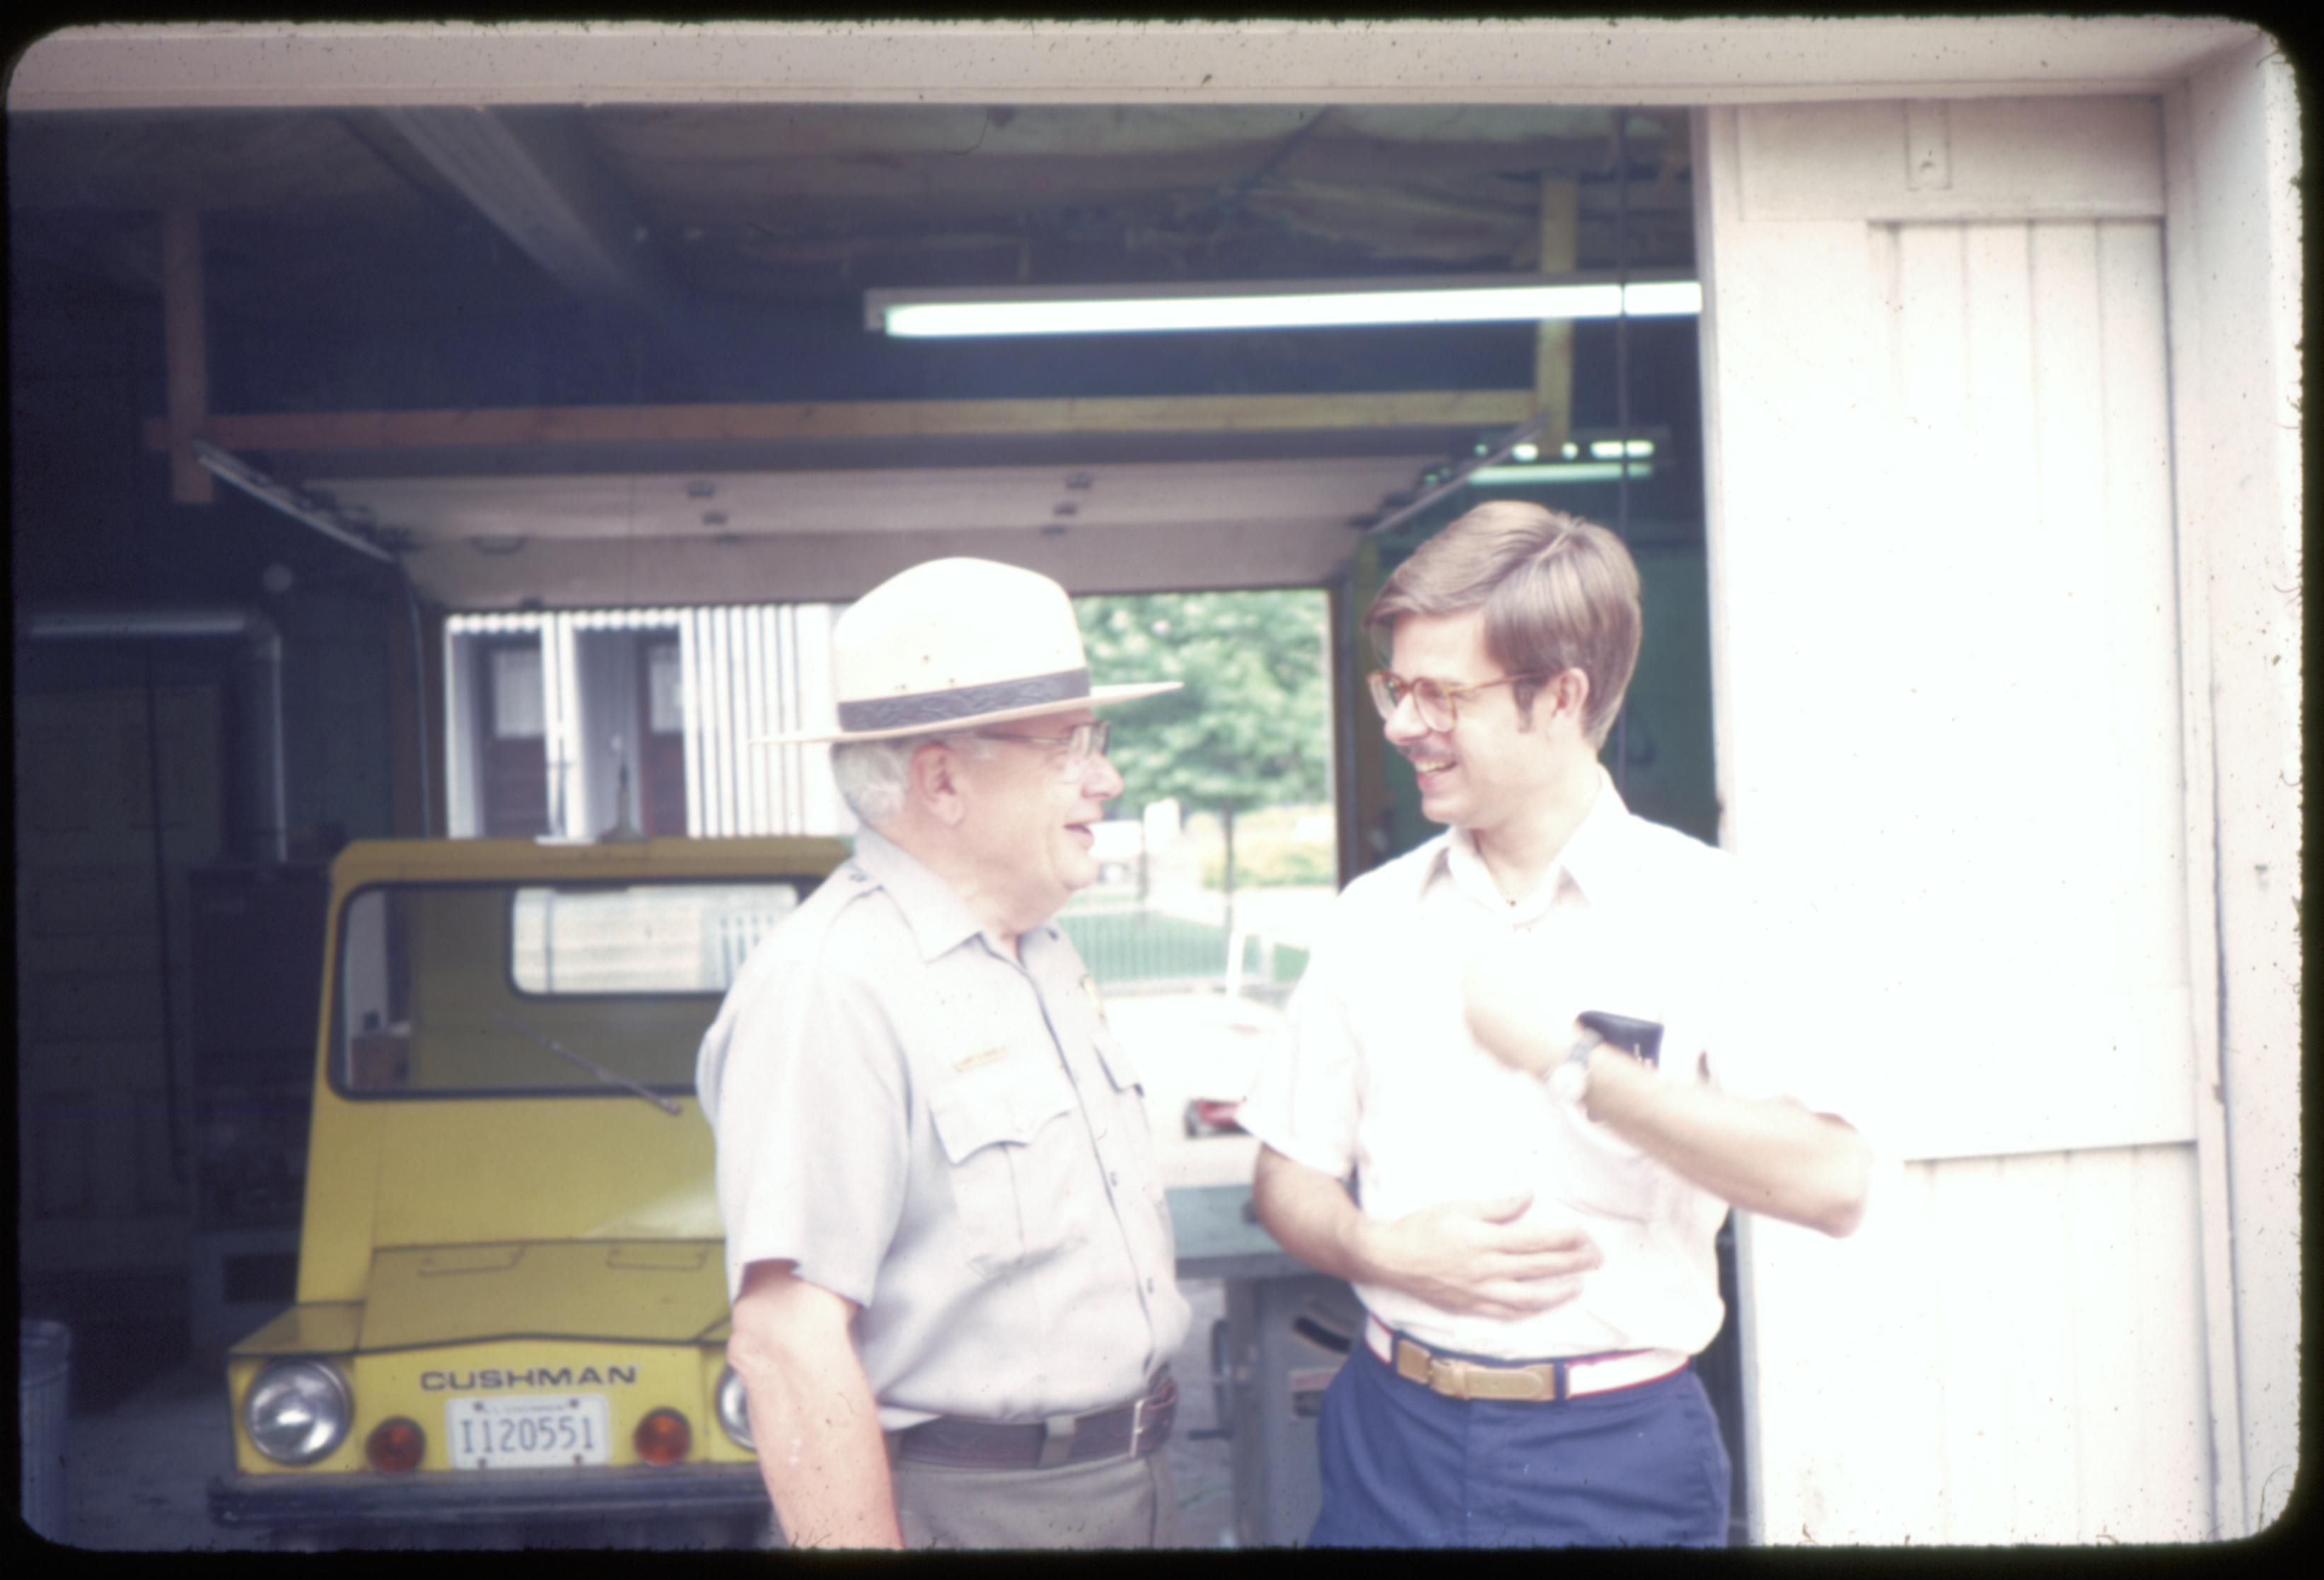 Supt. Al Banton talking to gentleman in the alley by the Maintenance Shop.  Stuve House west porch visible in background. Looking west staff, Maintenance Shop, Stuve, Cushman